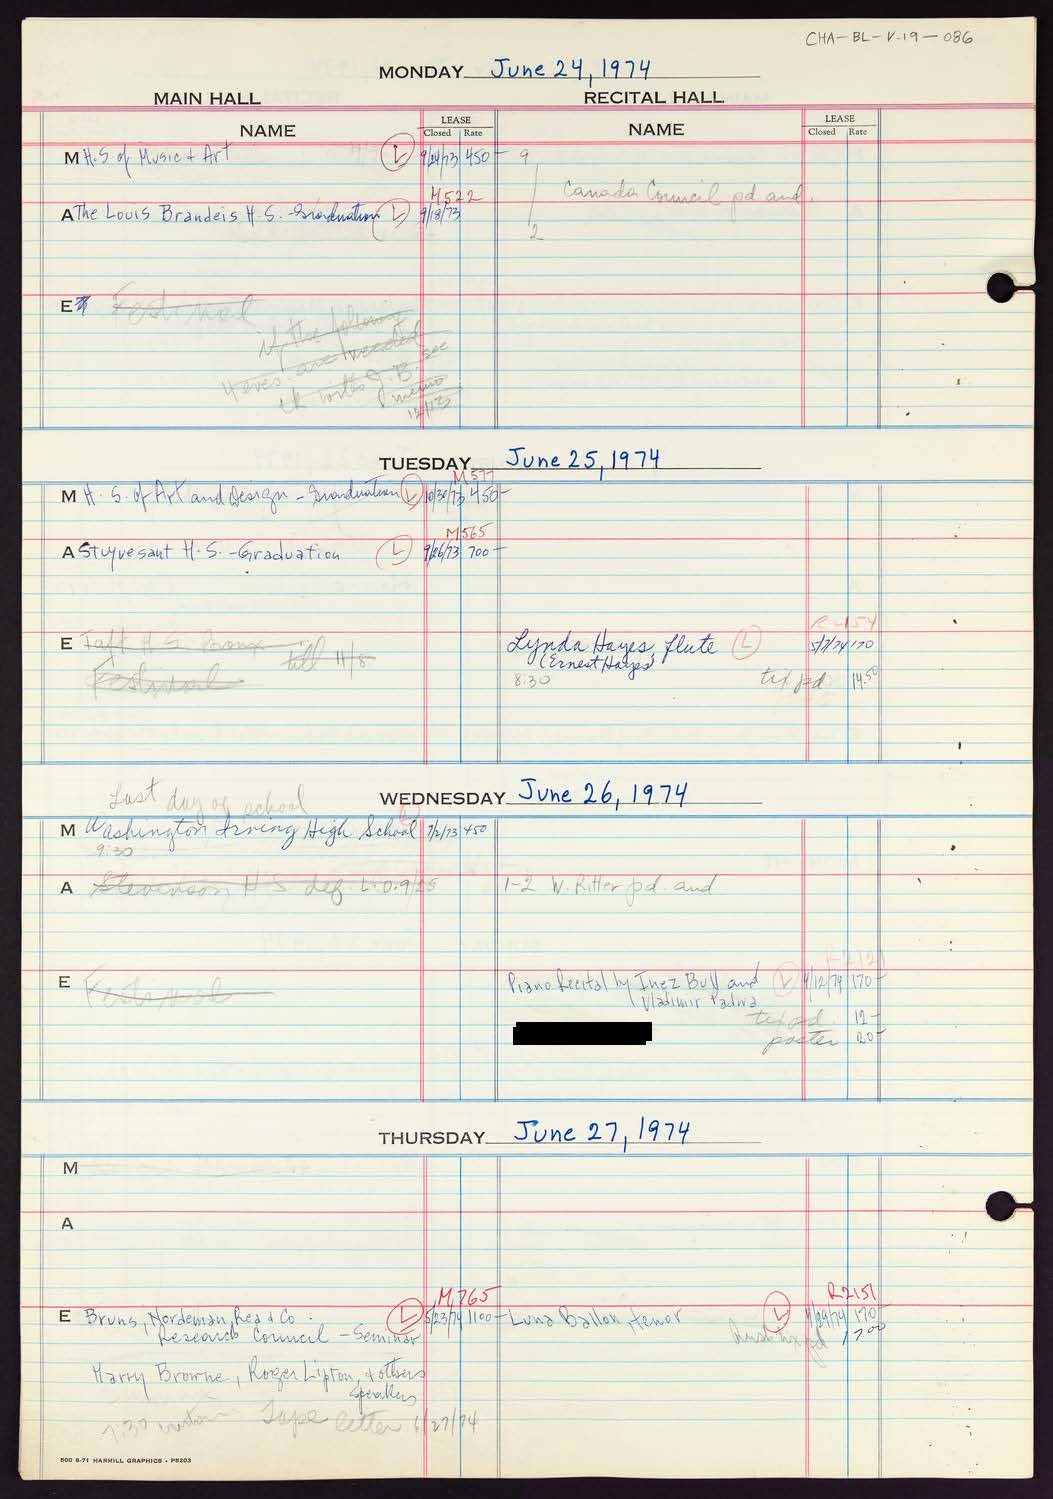 Carnegie Hall Booking Ledger, volume 19, page 86